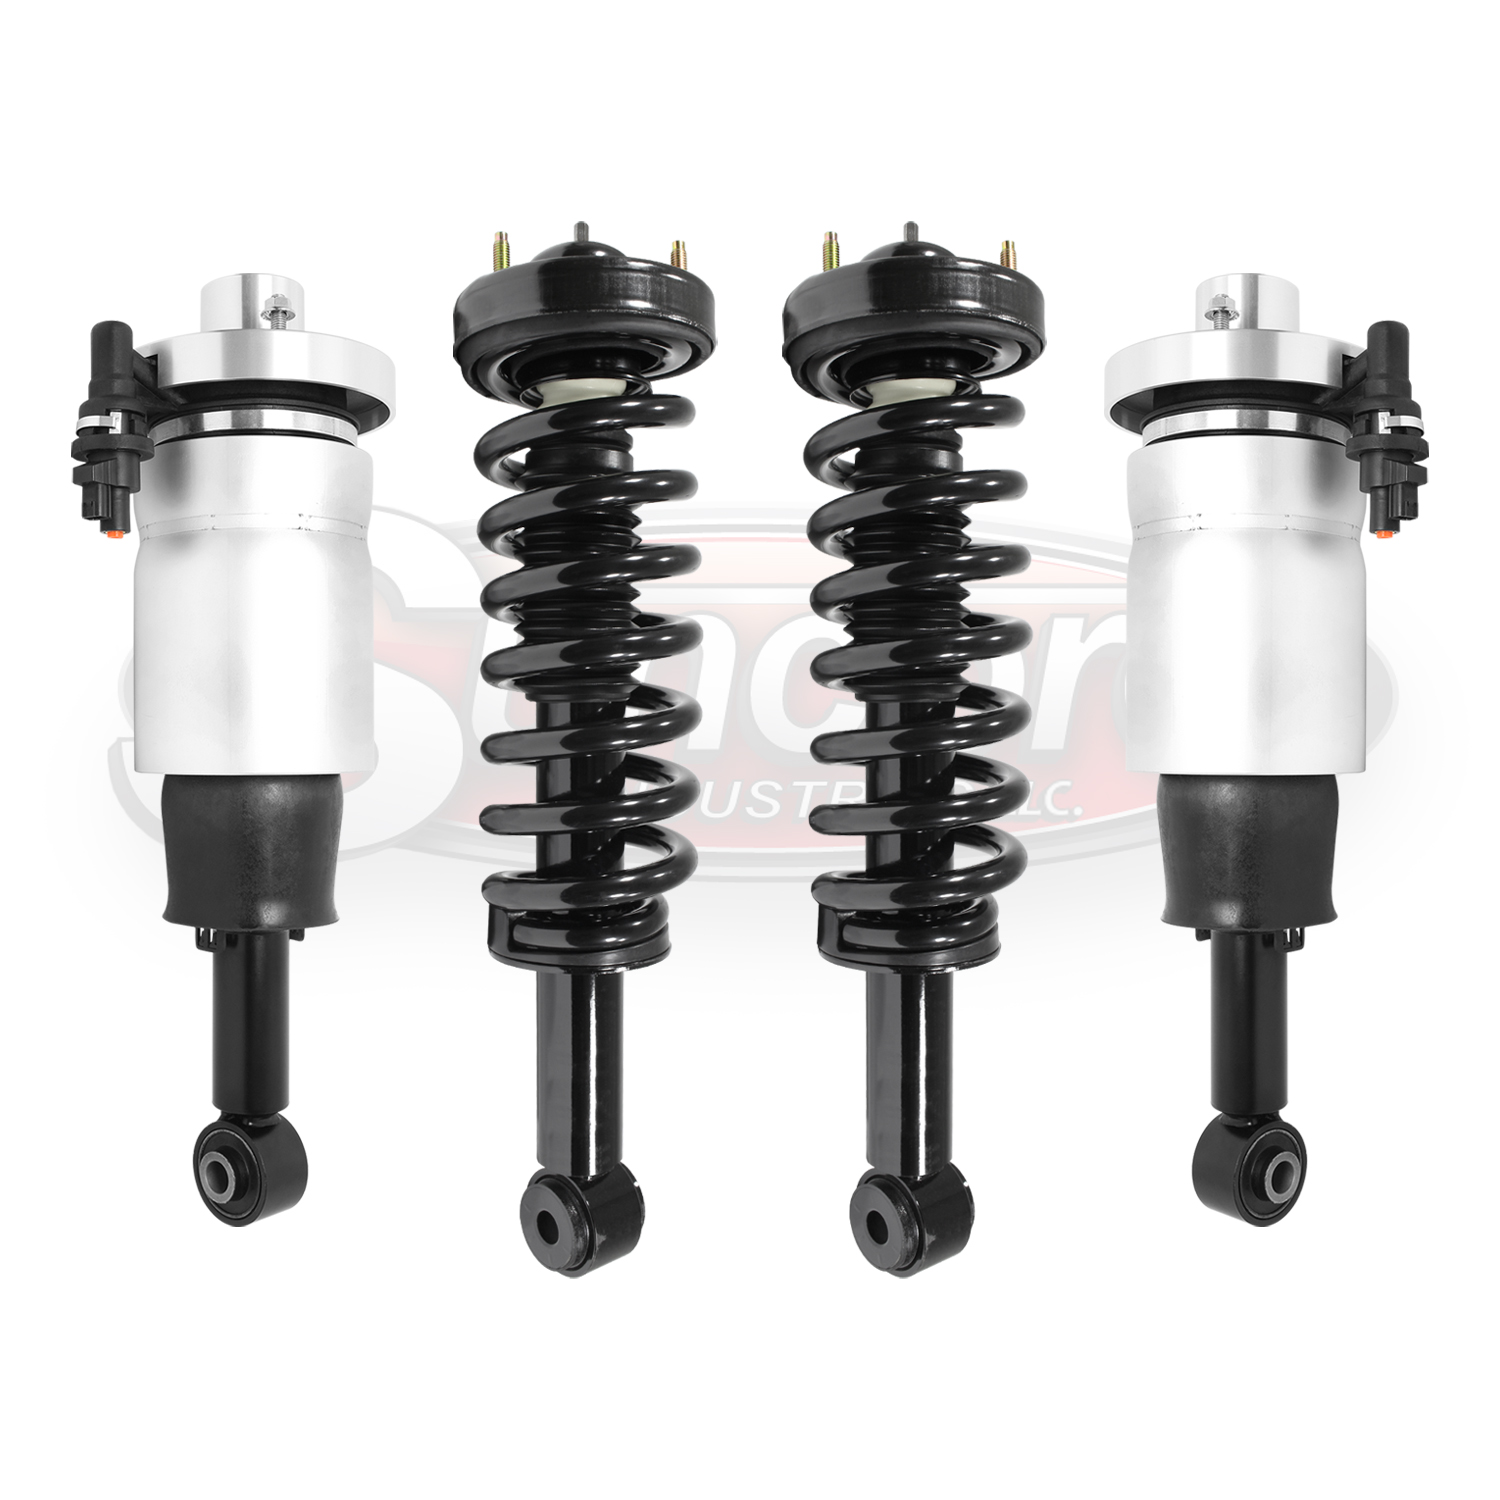 2007-2013 Ford Expedition & Lincoln Navigator Front Complete Strut Assemblies & Rear Air Struts